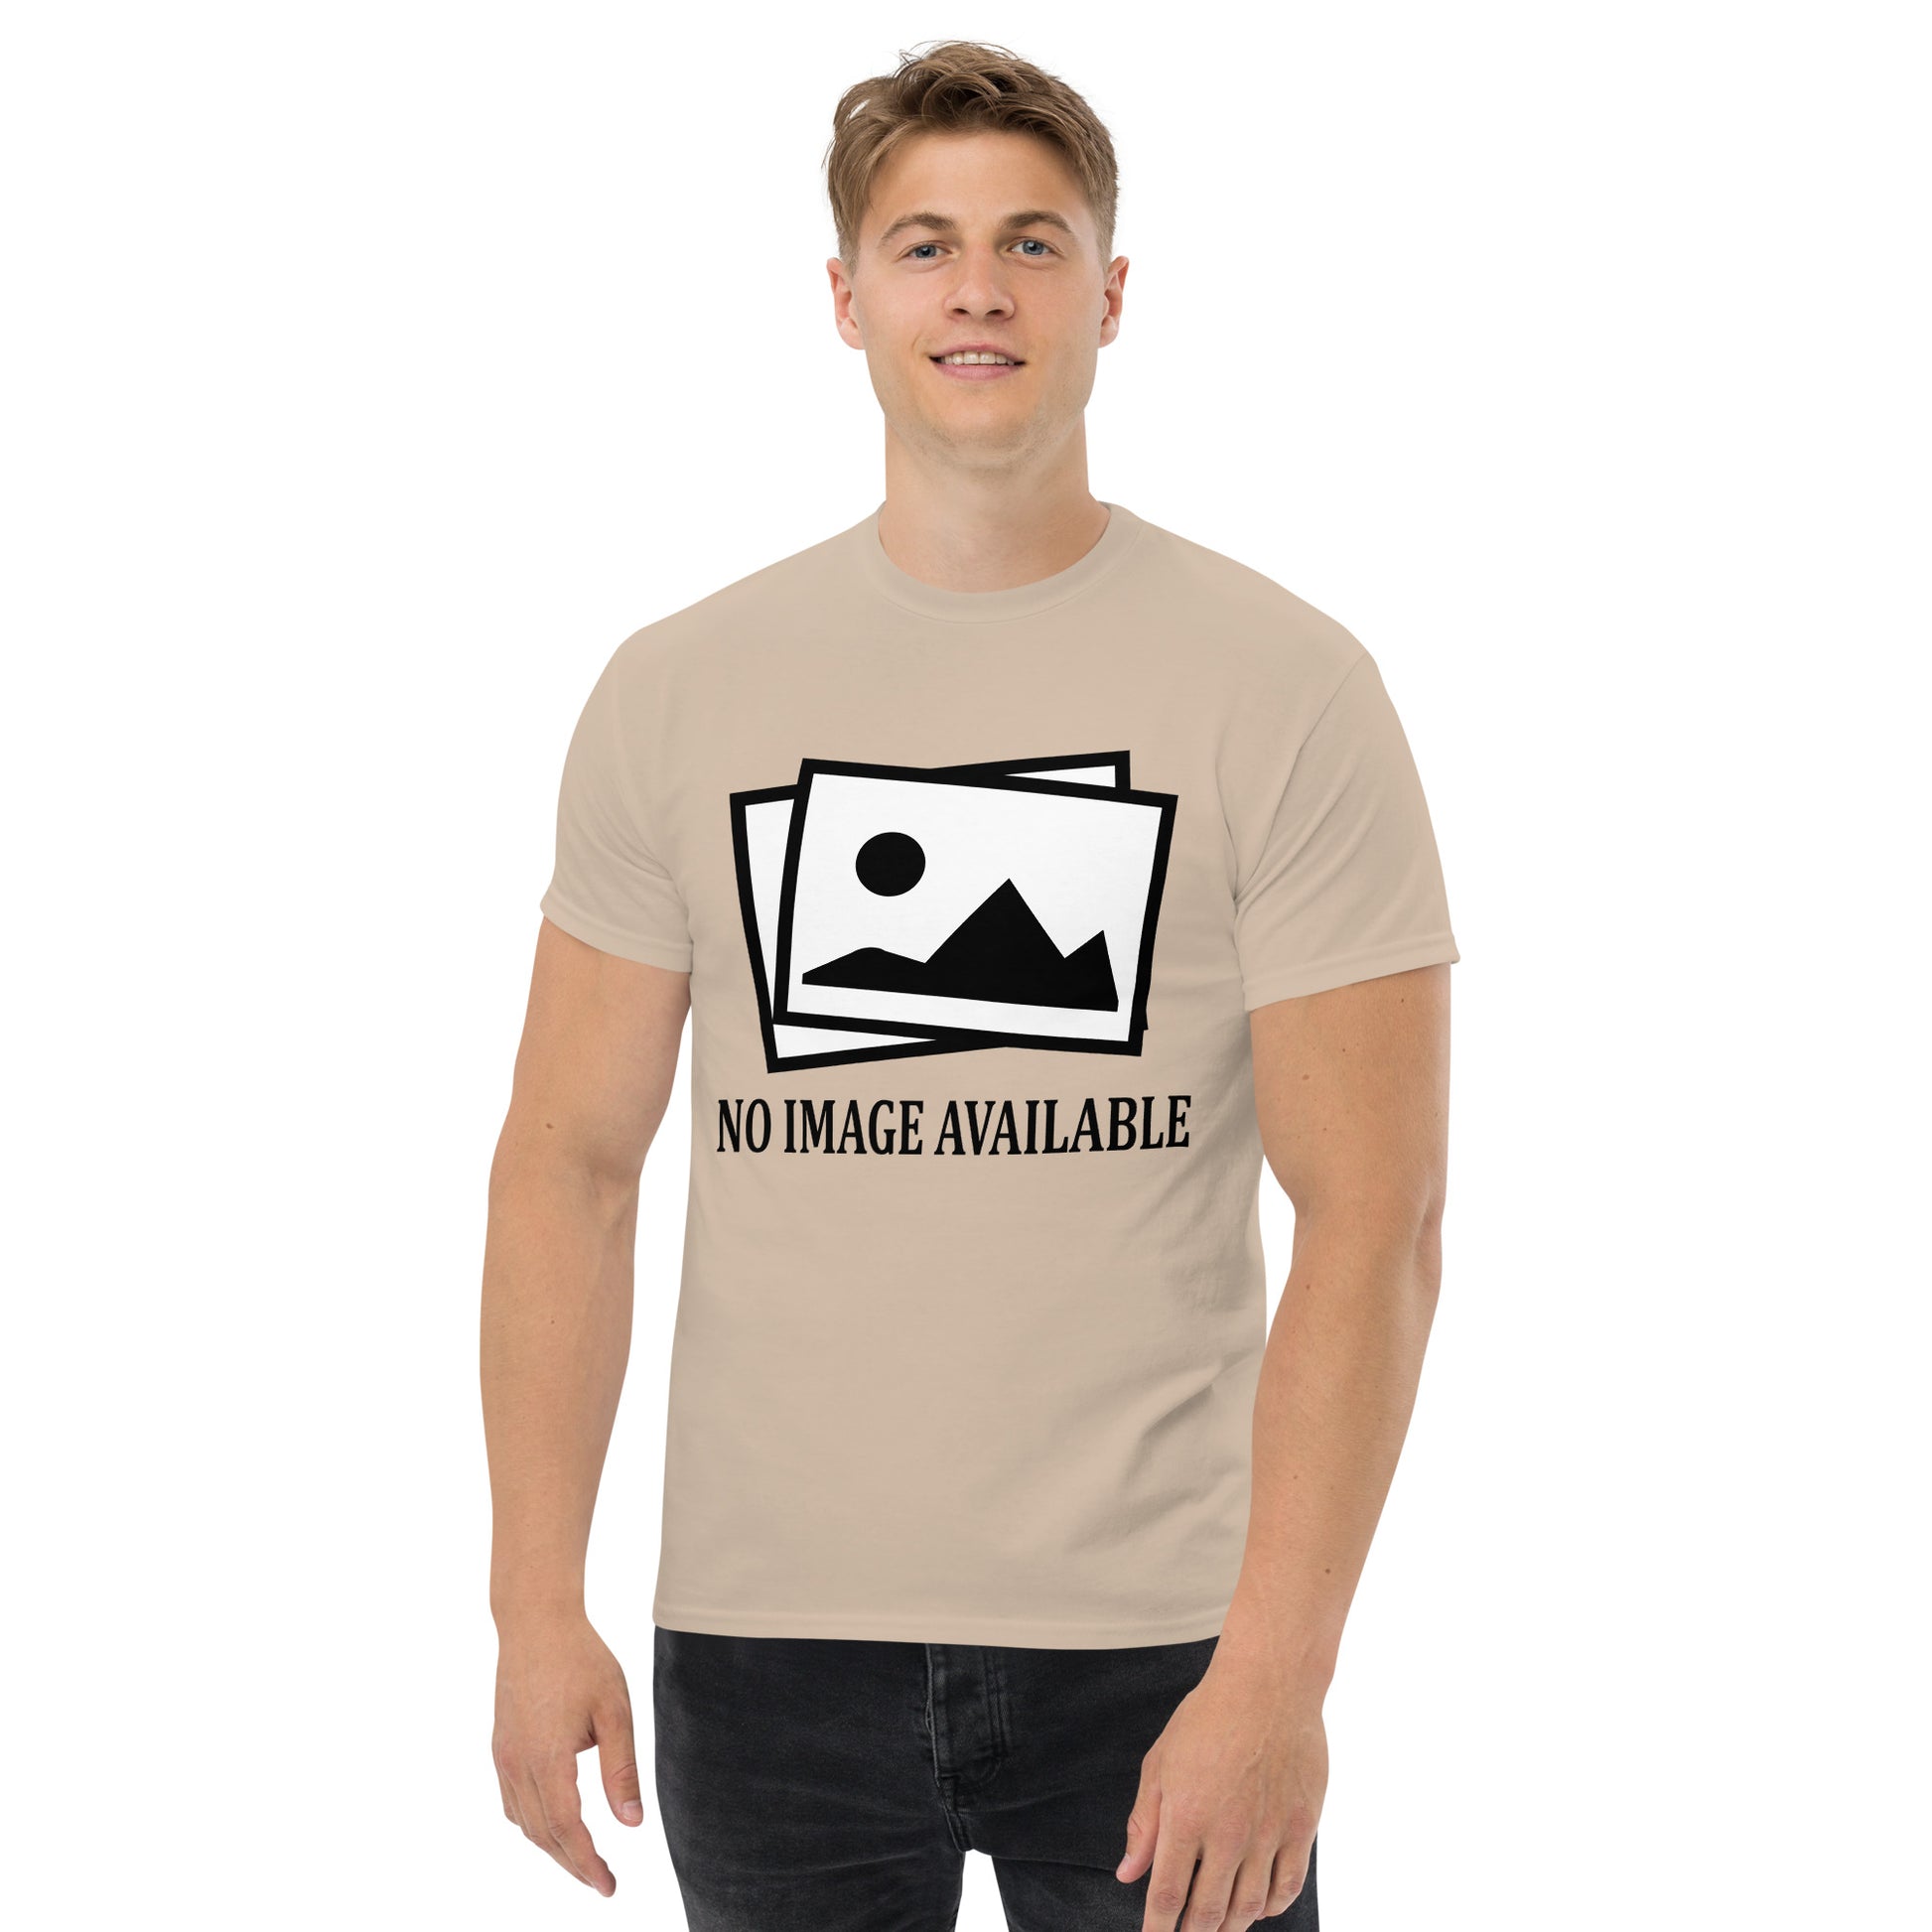 Men with sand t-shirt with image and text "no image available"